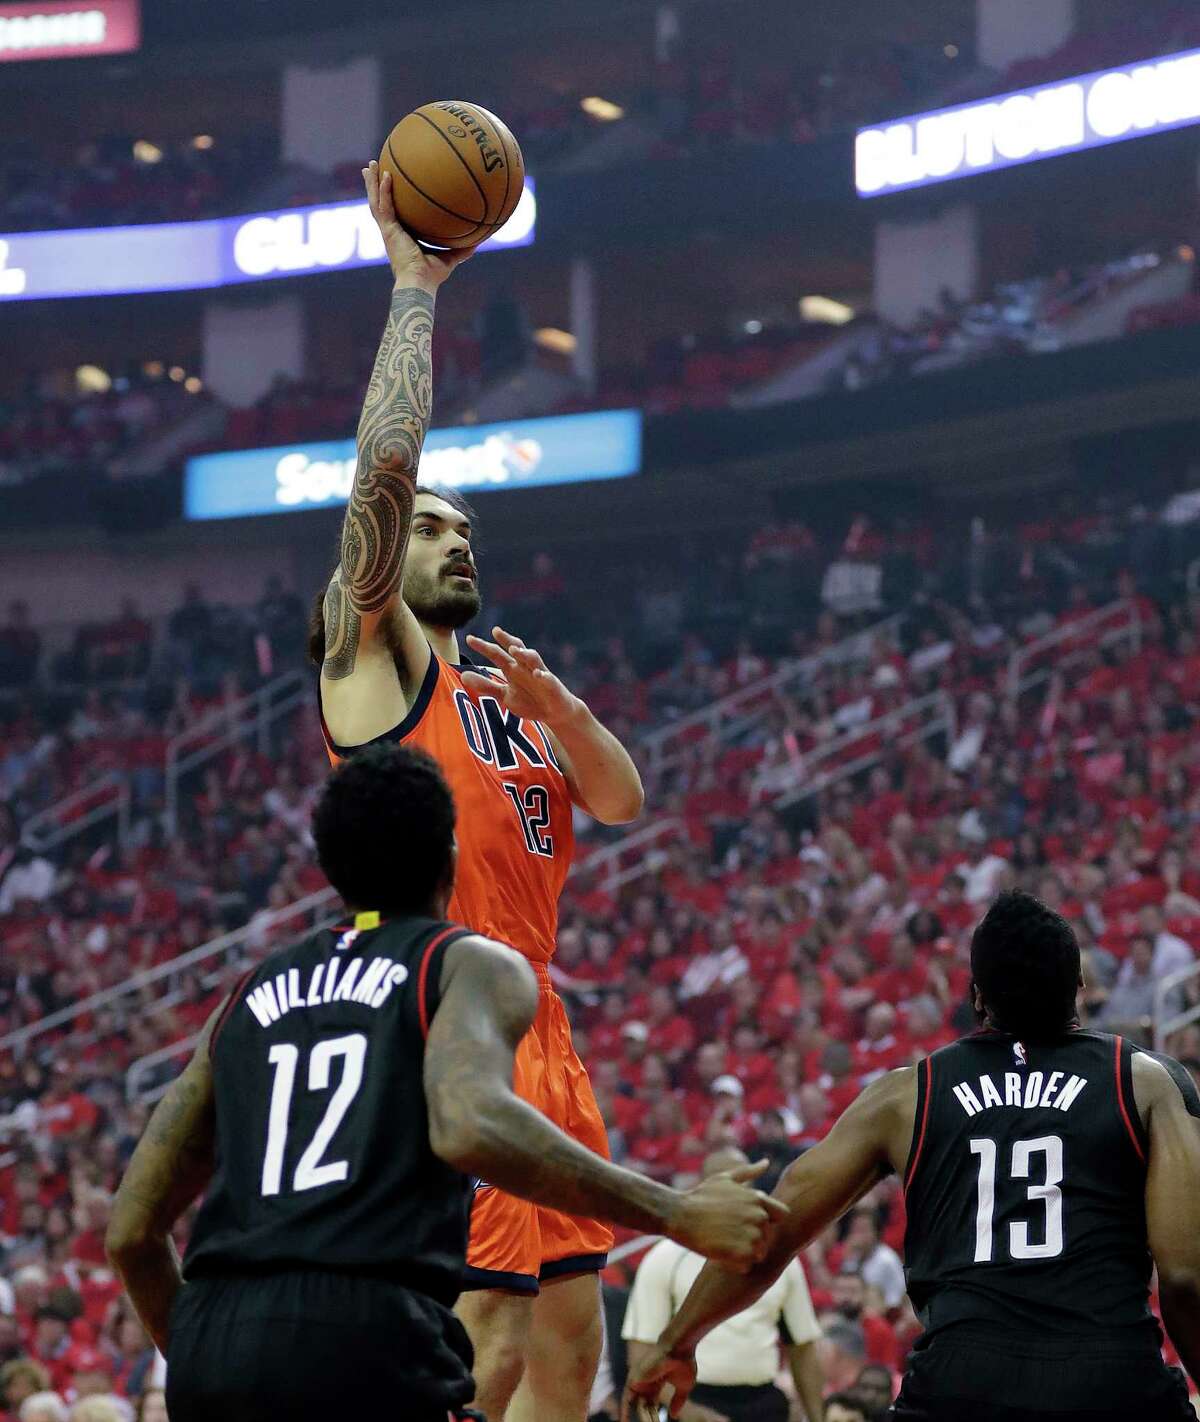 Oklahoma City Thunder's Steven Adams shoots against Houston Rockets' Lou Williams (12) and James Harden (13) during the first half of Game 1 of an NBA basketball first-round playoff series, Sunday, April 16, 2017, in Houston. (AP Photo/David J. Phillip)